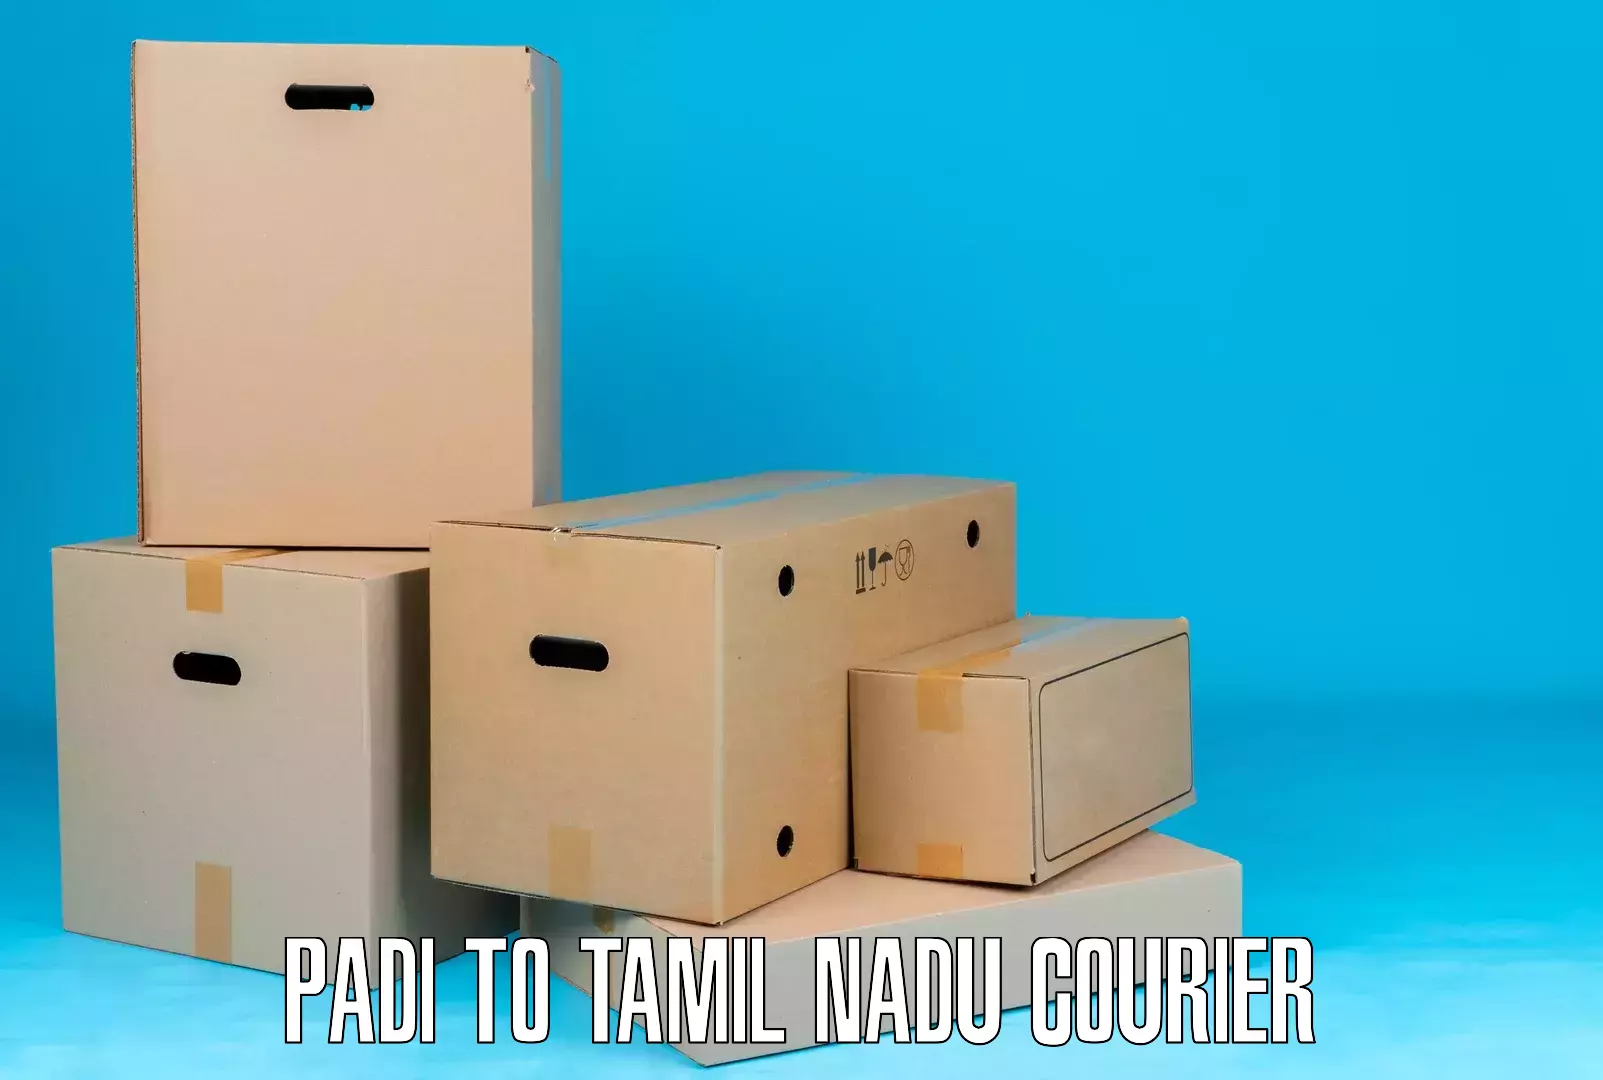 Package delivery network Padi to Virudhunagar